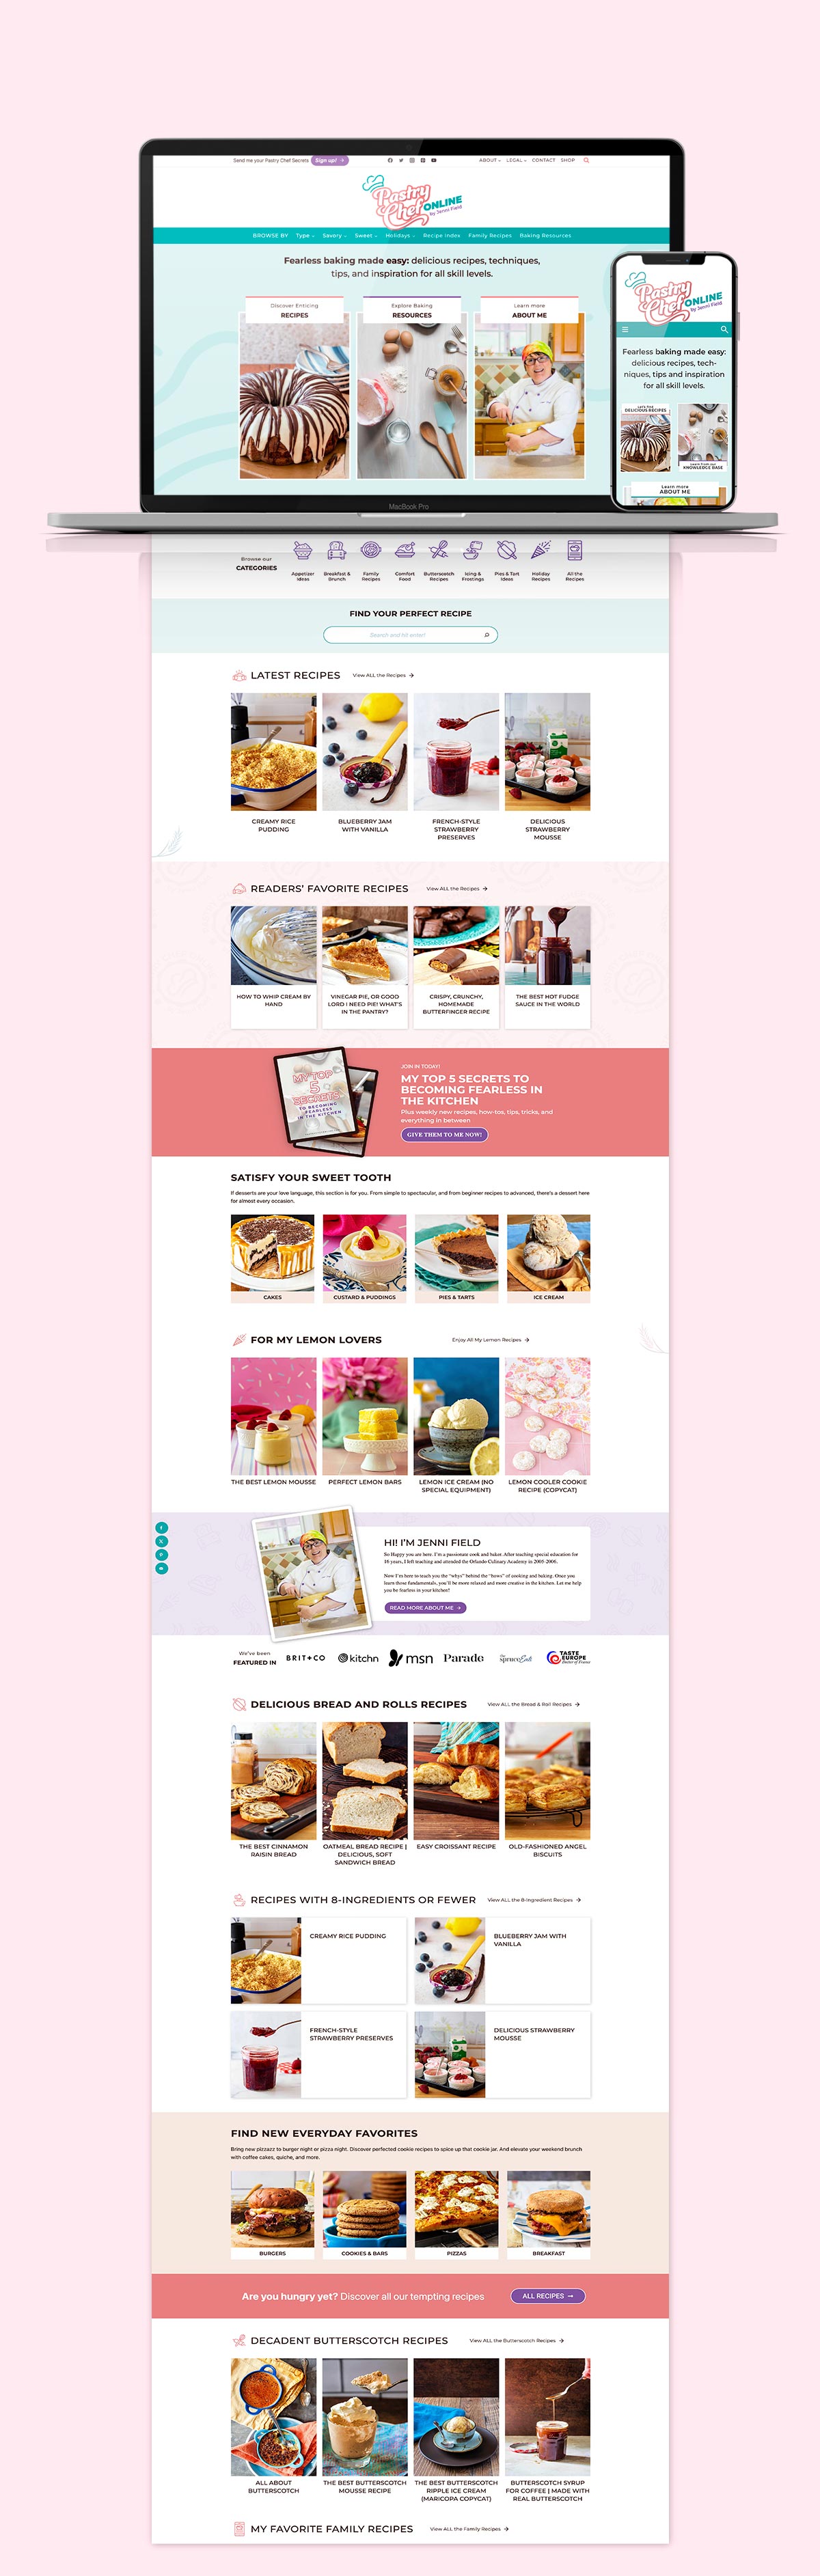 Pastry Chef Online Custom Website design featuring Homepage